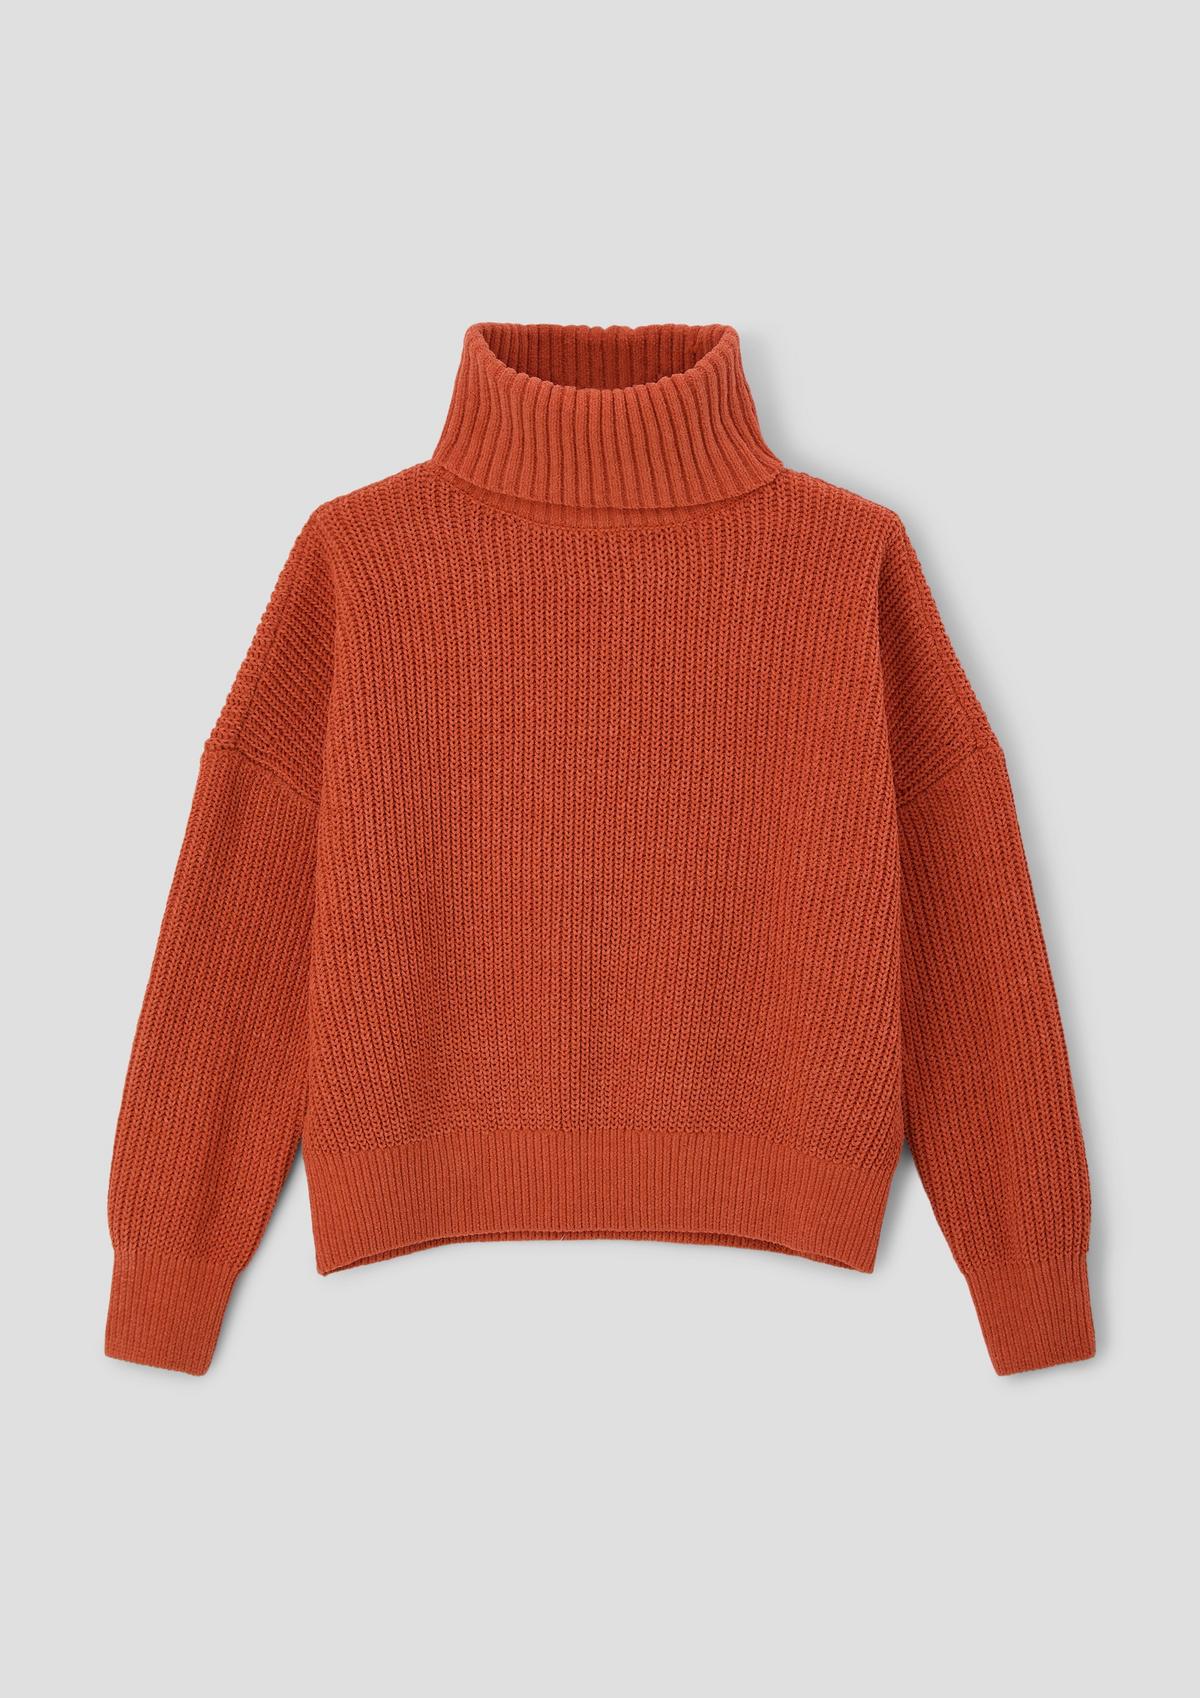 Knit jumper with a polo neck